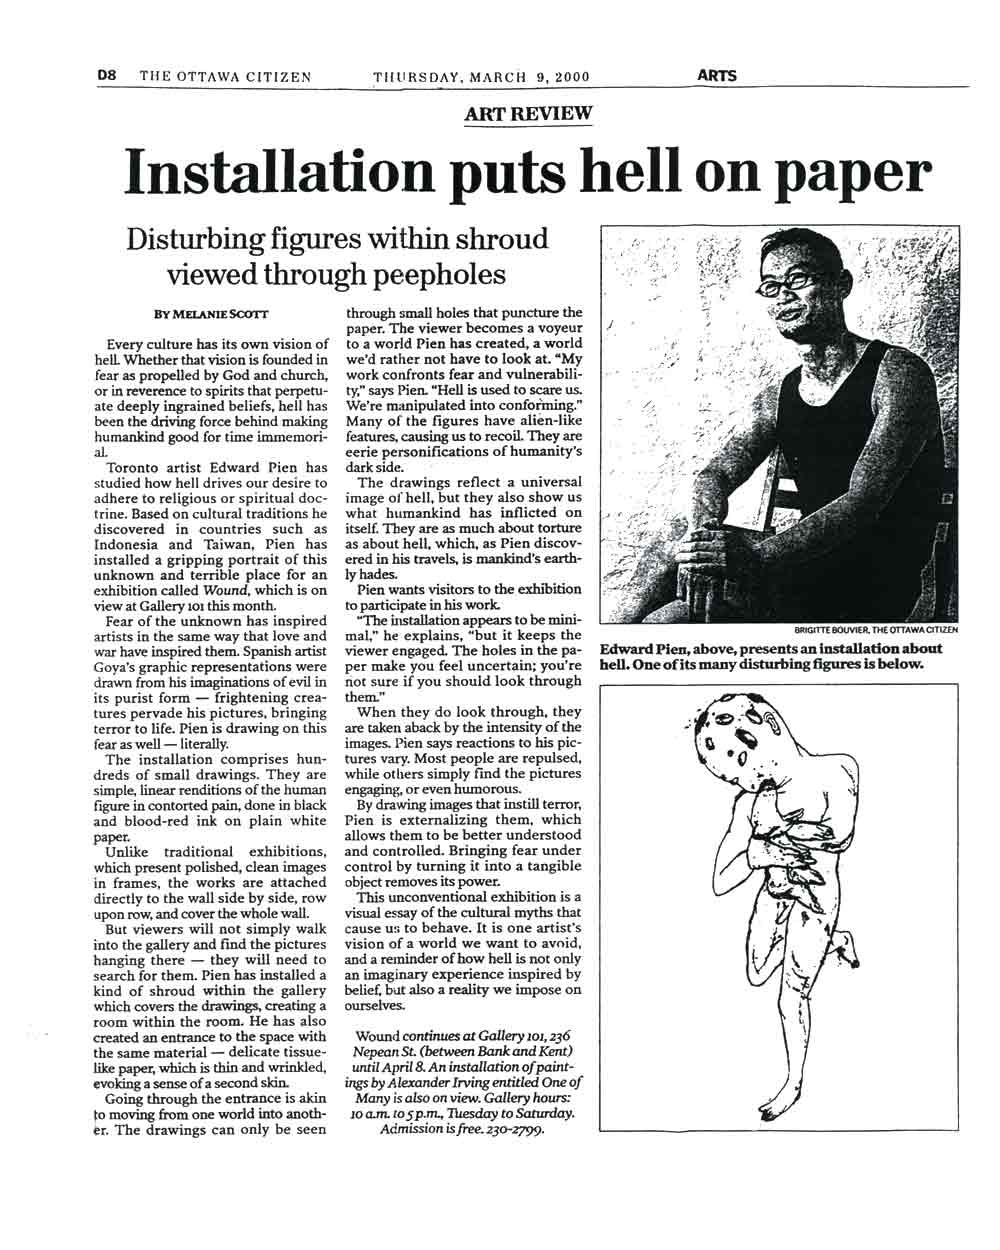 Installation Puts Hell on Paper